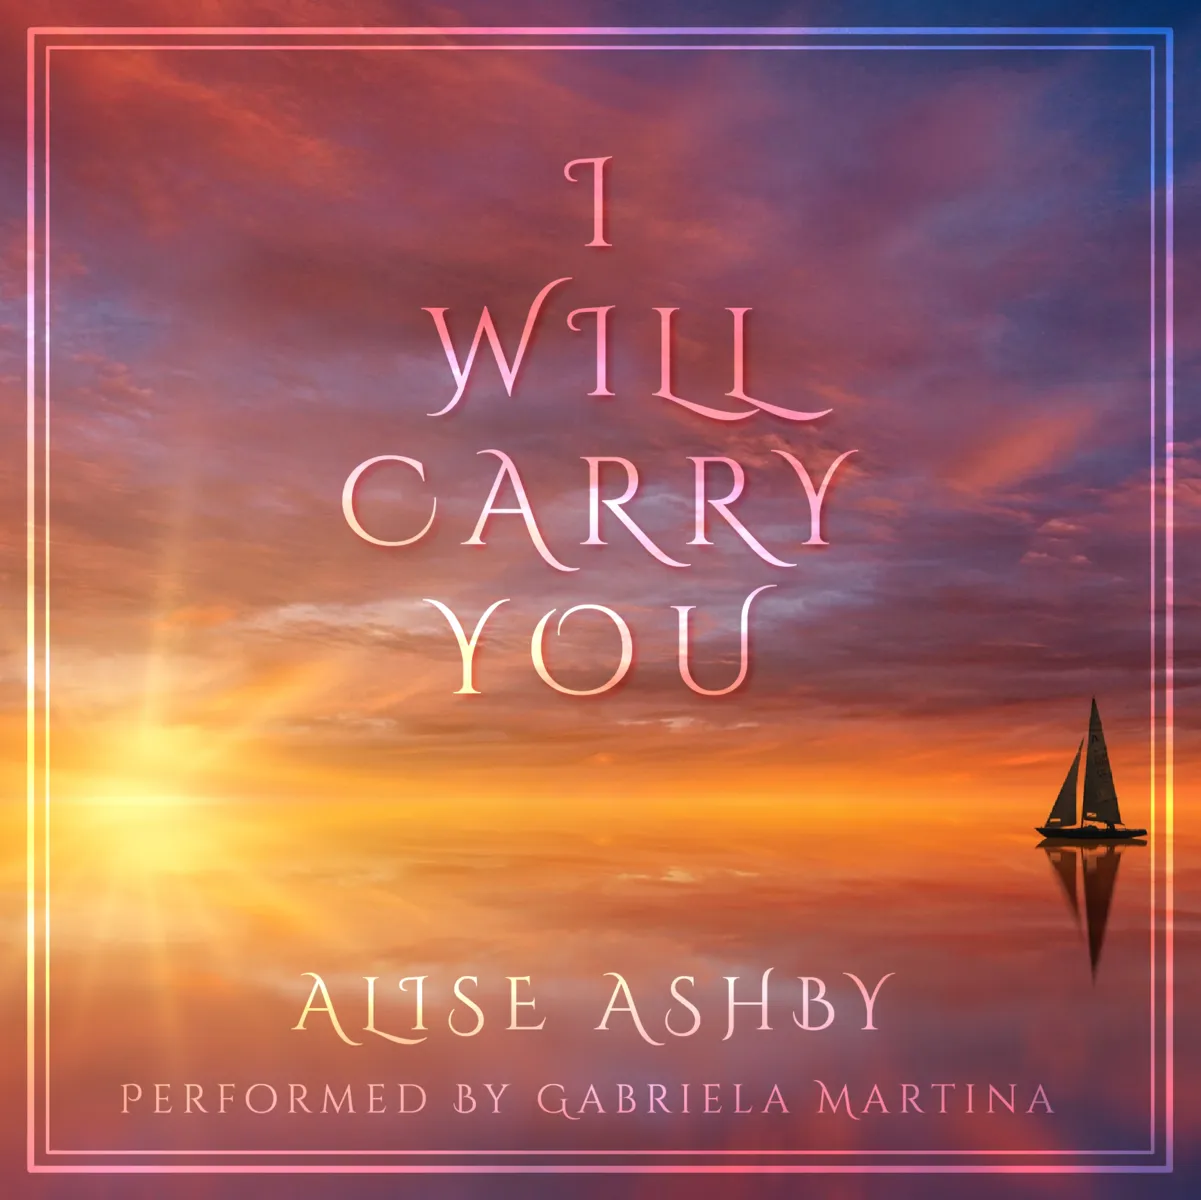 I Will Carry You - Single - Digital Download